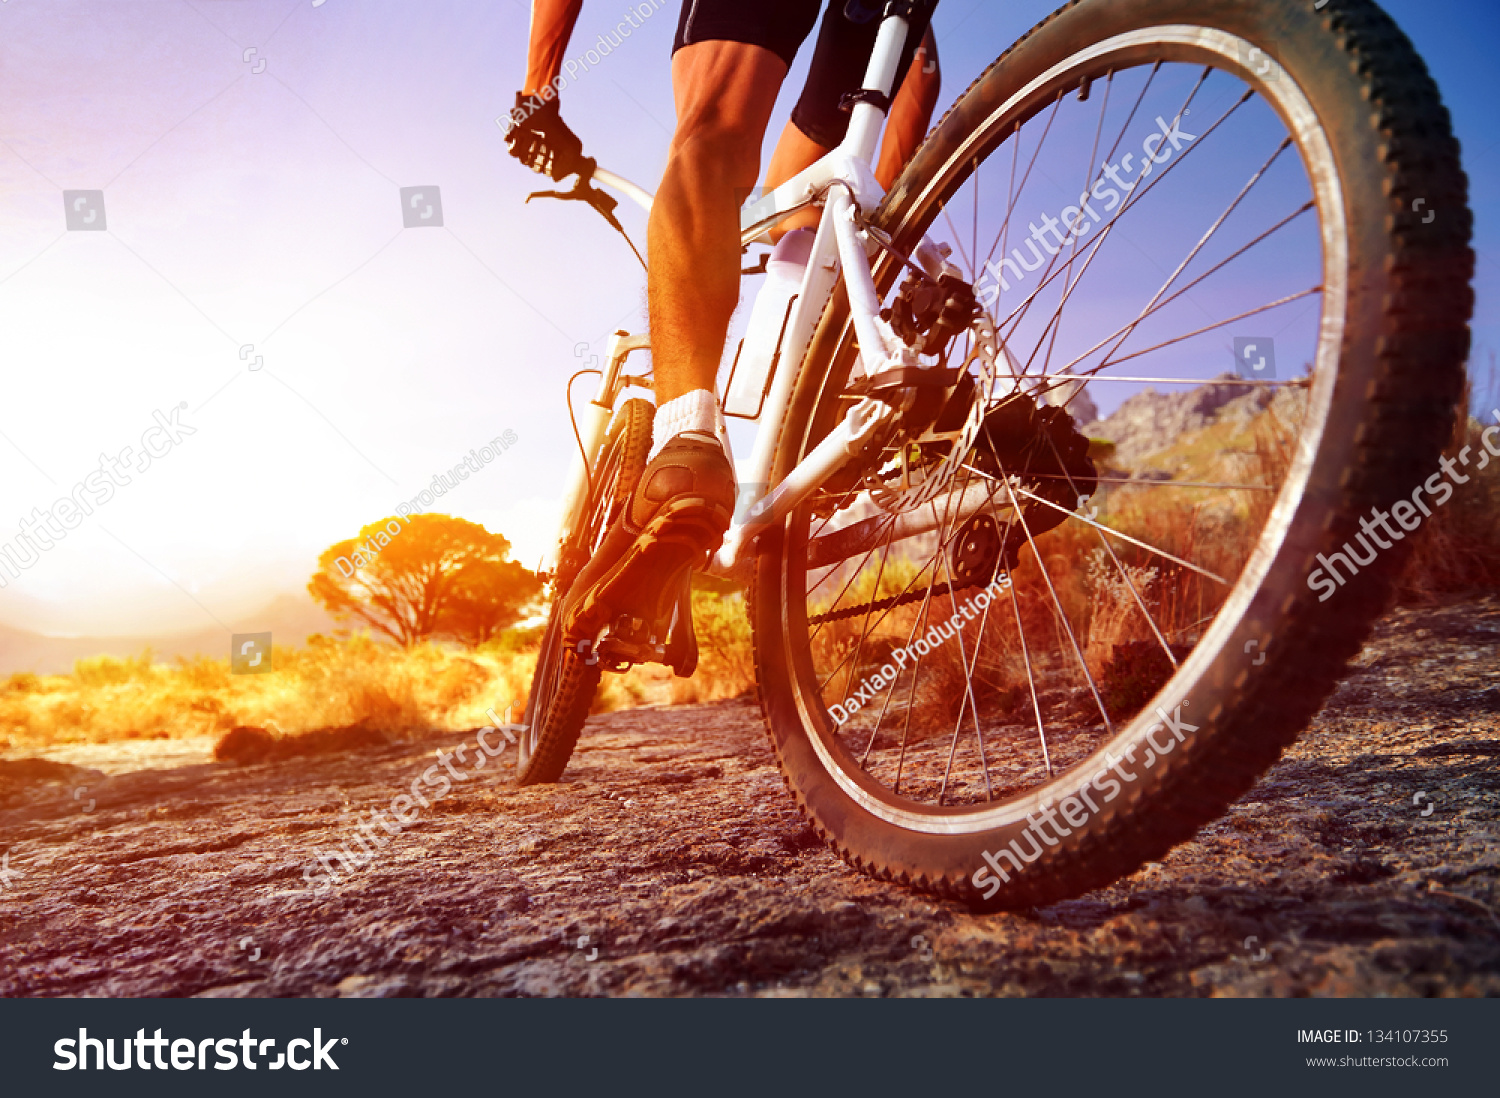 low angle view of cyclist riding mountain bike on rocky trail at sunrise #134107355